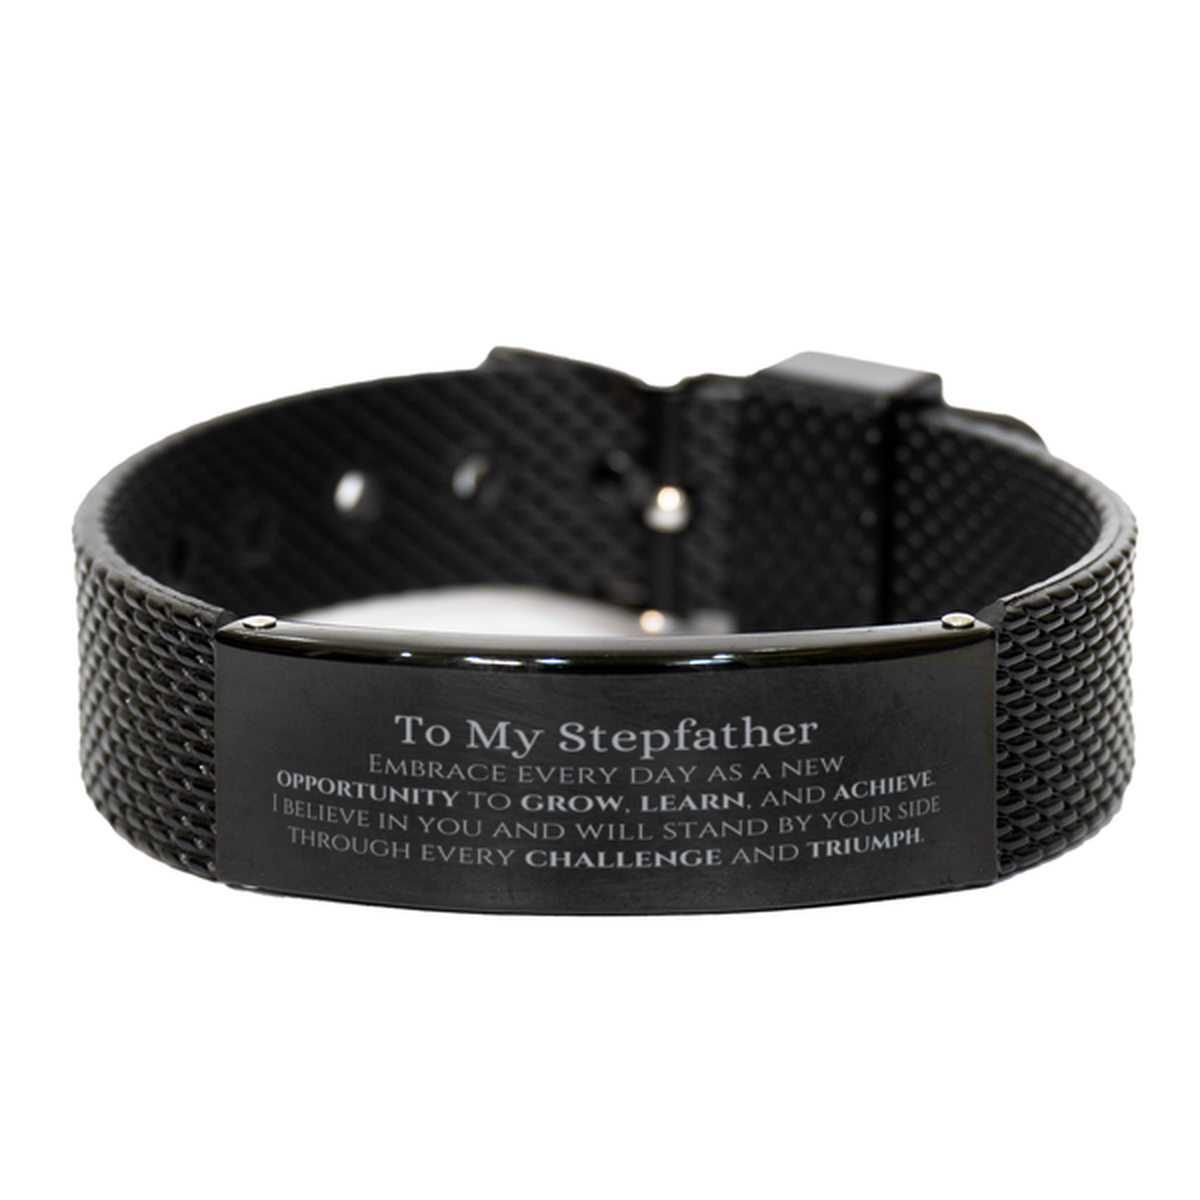 To My Stepfather Gifts, I believe in you and will stand by your side, Inspirational Black Shark Mesh Bracelet For Stepfather, Birthday Christmas Motivational Stepfather Gifts